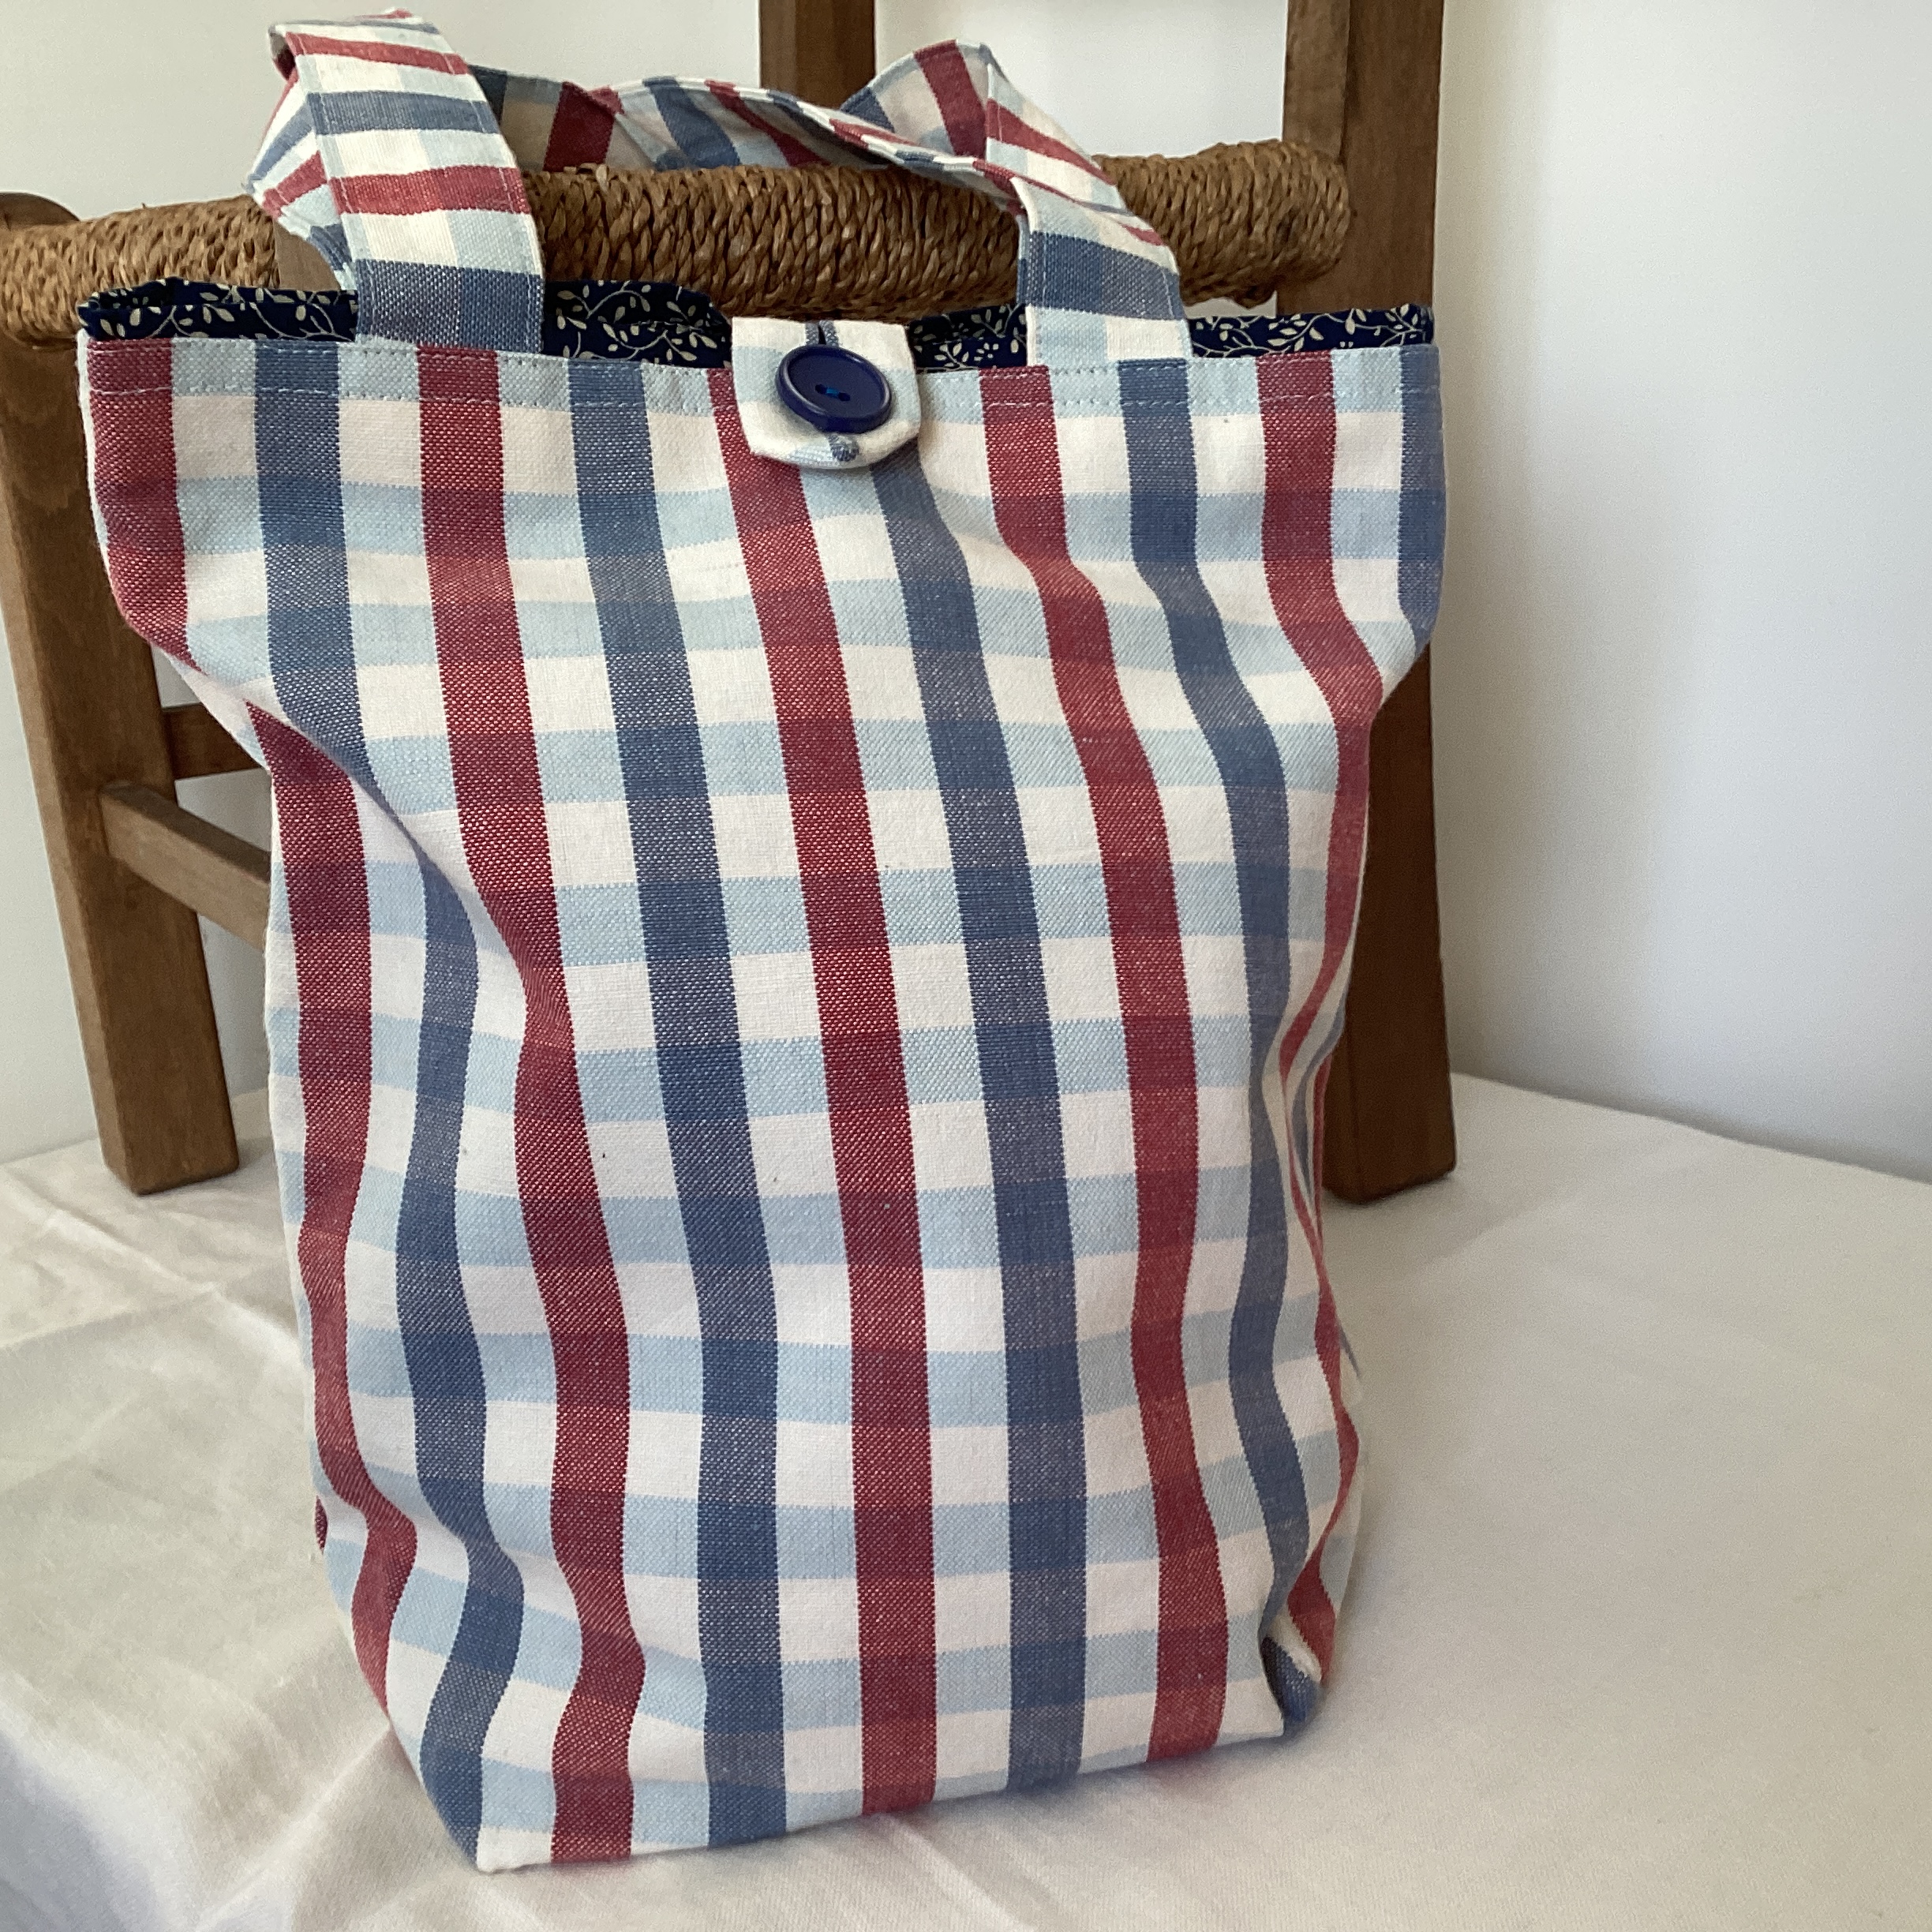 Tote Bag - red and blue check